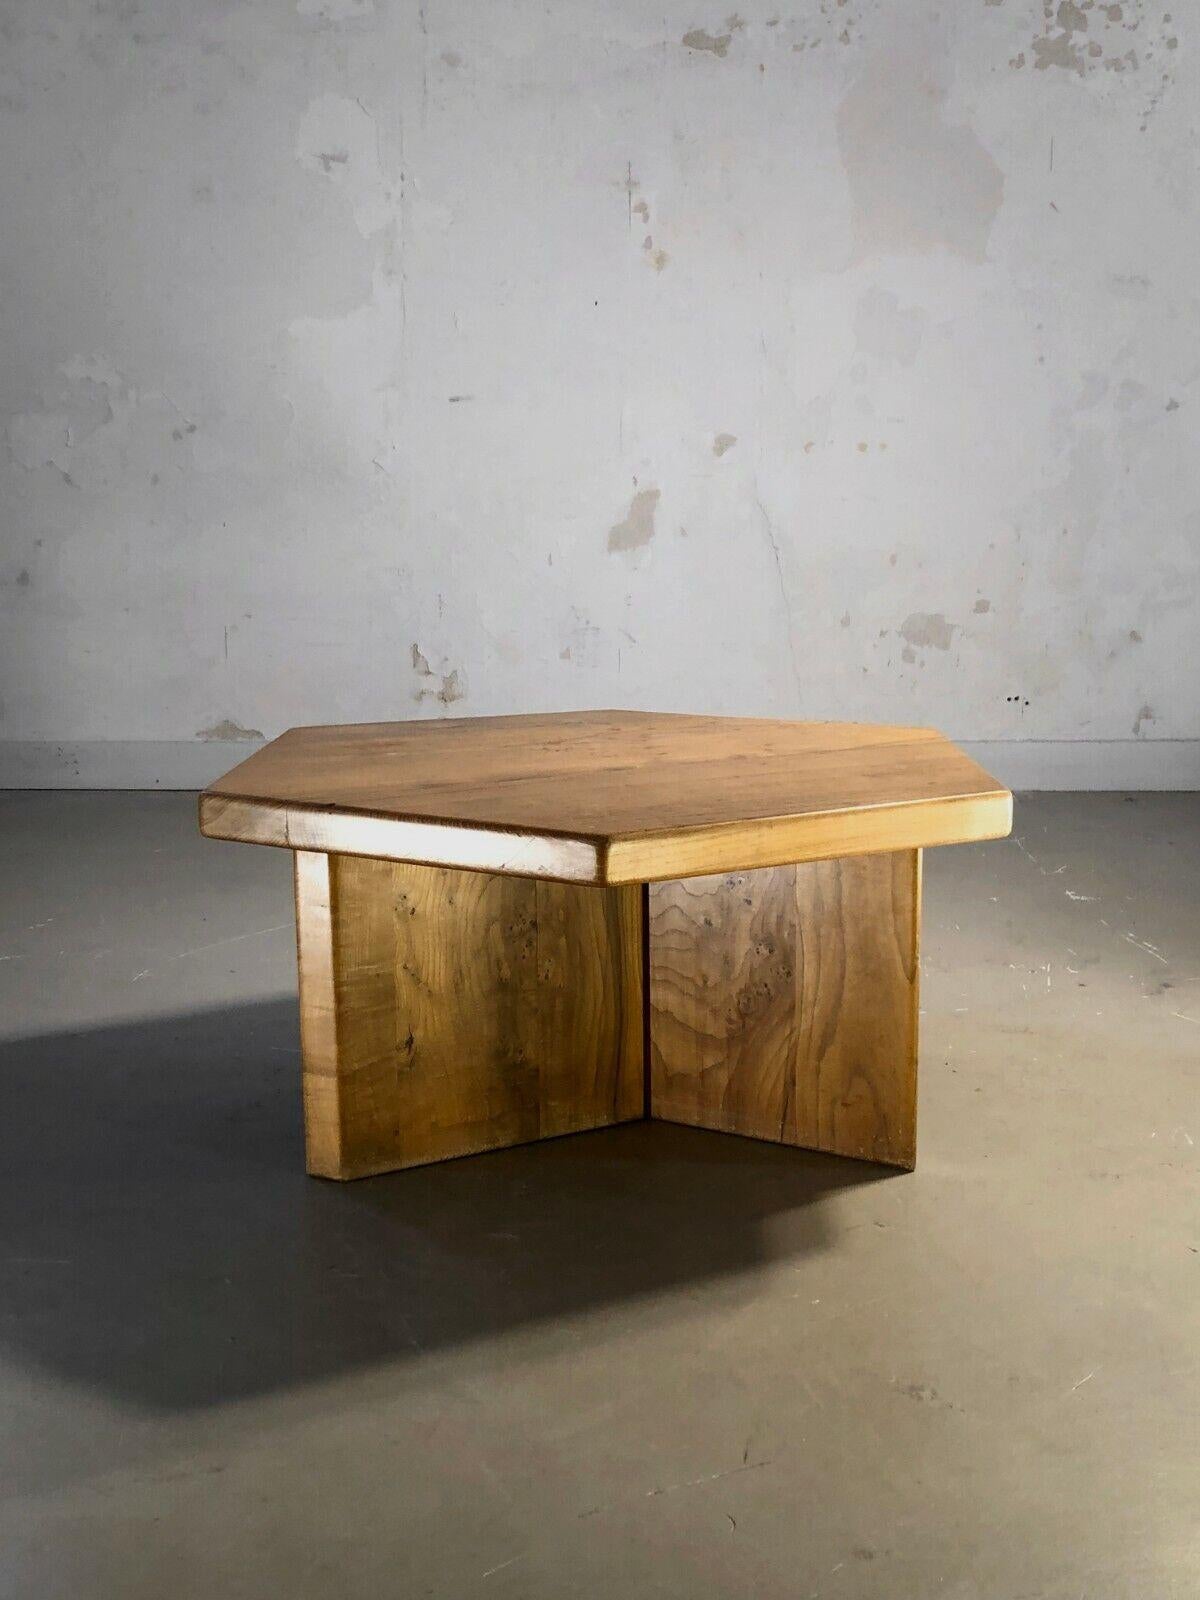 A small but powerful hexagonal coffee table on a tripod base; might be used also as a side table, bedside table or a headboard; Modernist, Brutalist, Folk Art, Forme-Libre, structure and tray in massive elm by Maison Regain, France, 1950-1960.